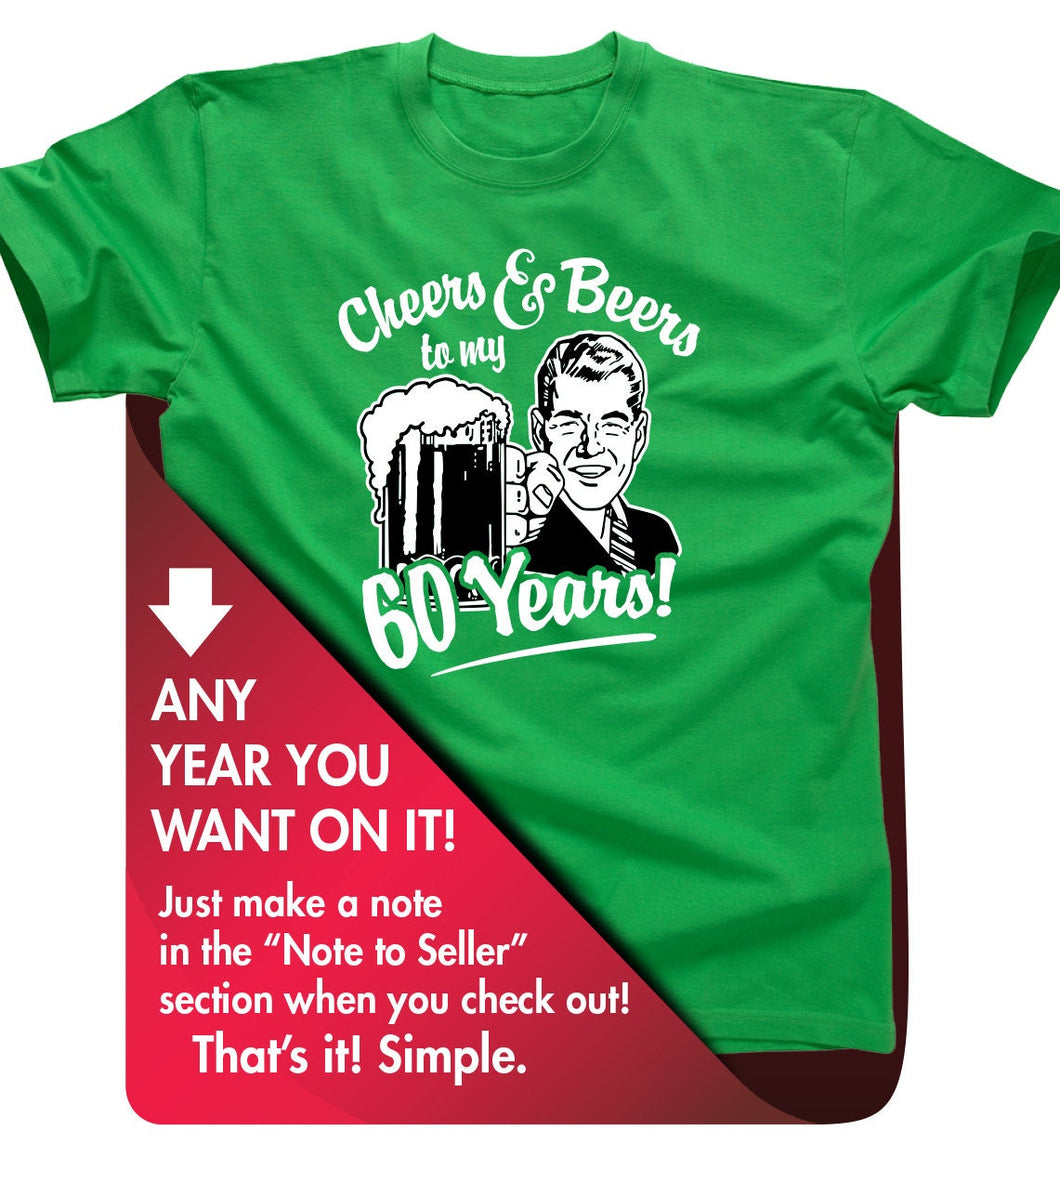 Funny 60th Birthday Gift For Men and Women - Cheers and Beers to my 60 Years! Vintage Retro Funny Beer Shirt T-shirt Gift. Any Year CB-60